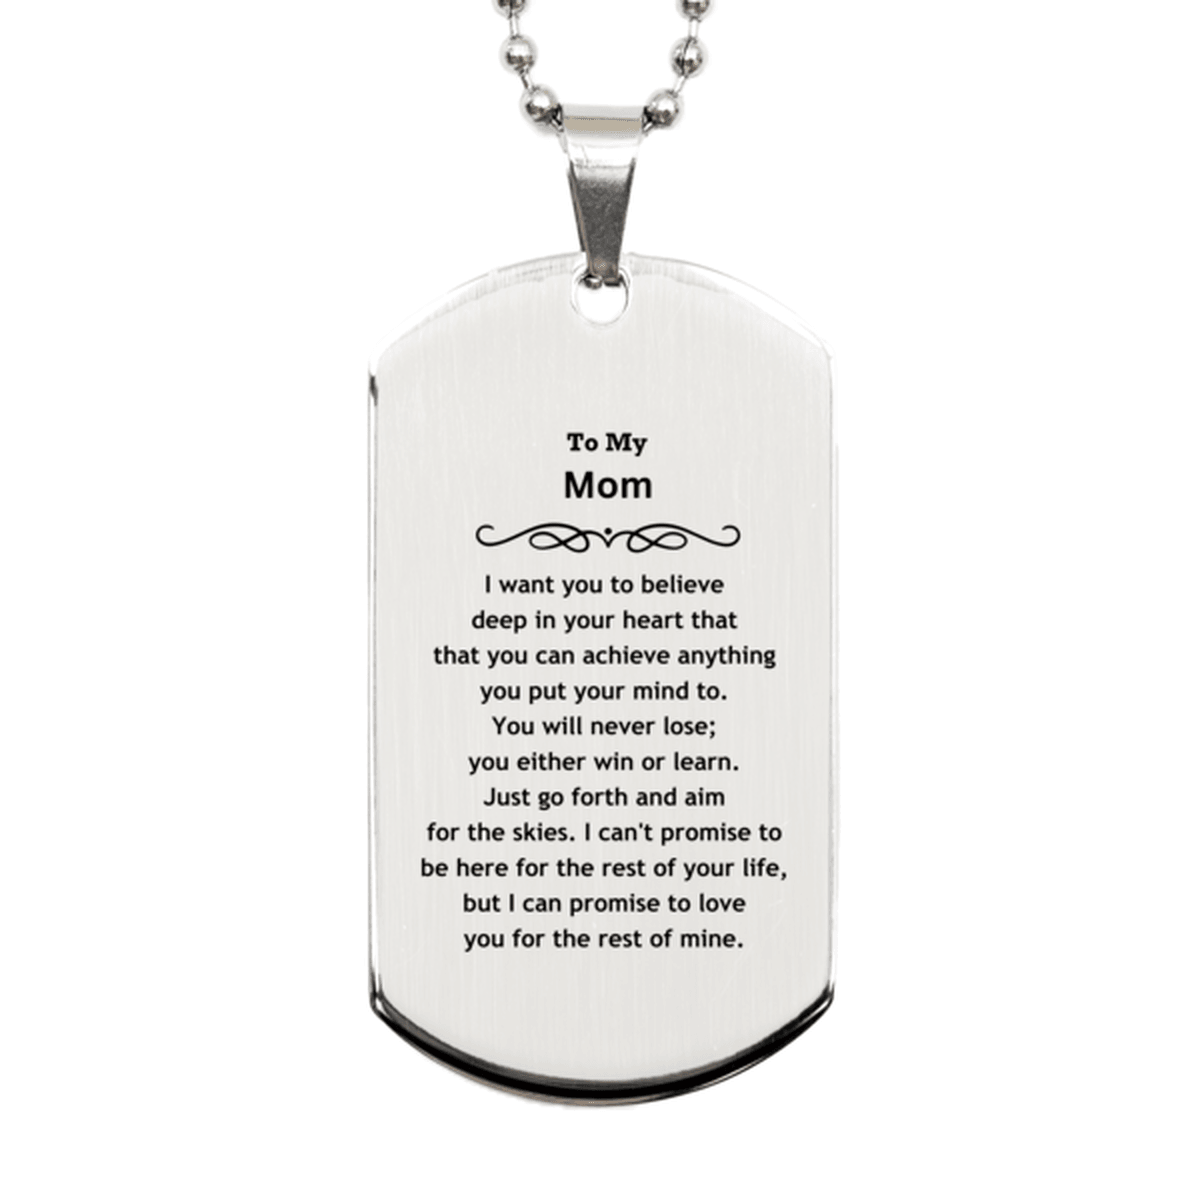 Motivational Mom Silver Dog Tag Engraved Necklace, I can promise to love you for the rest of my life, Birthday Christmas Jewelry Gift - Mallard Moon Gift Shop